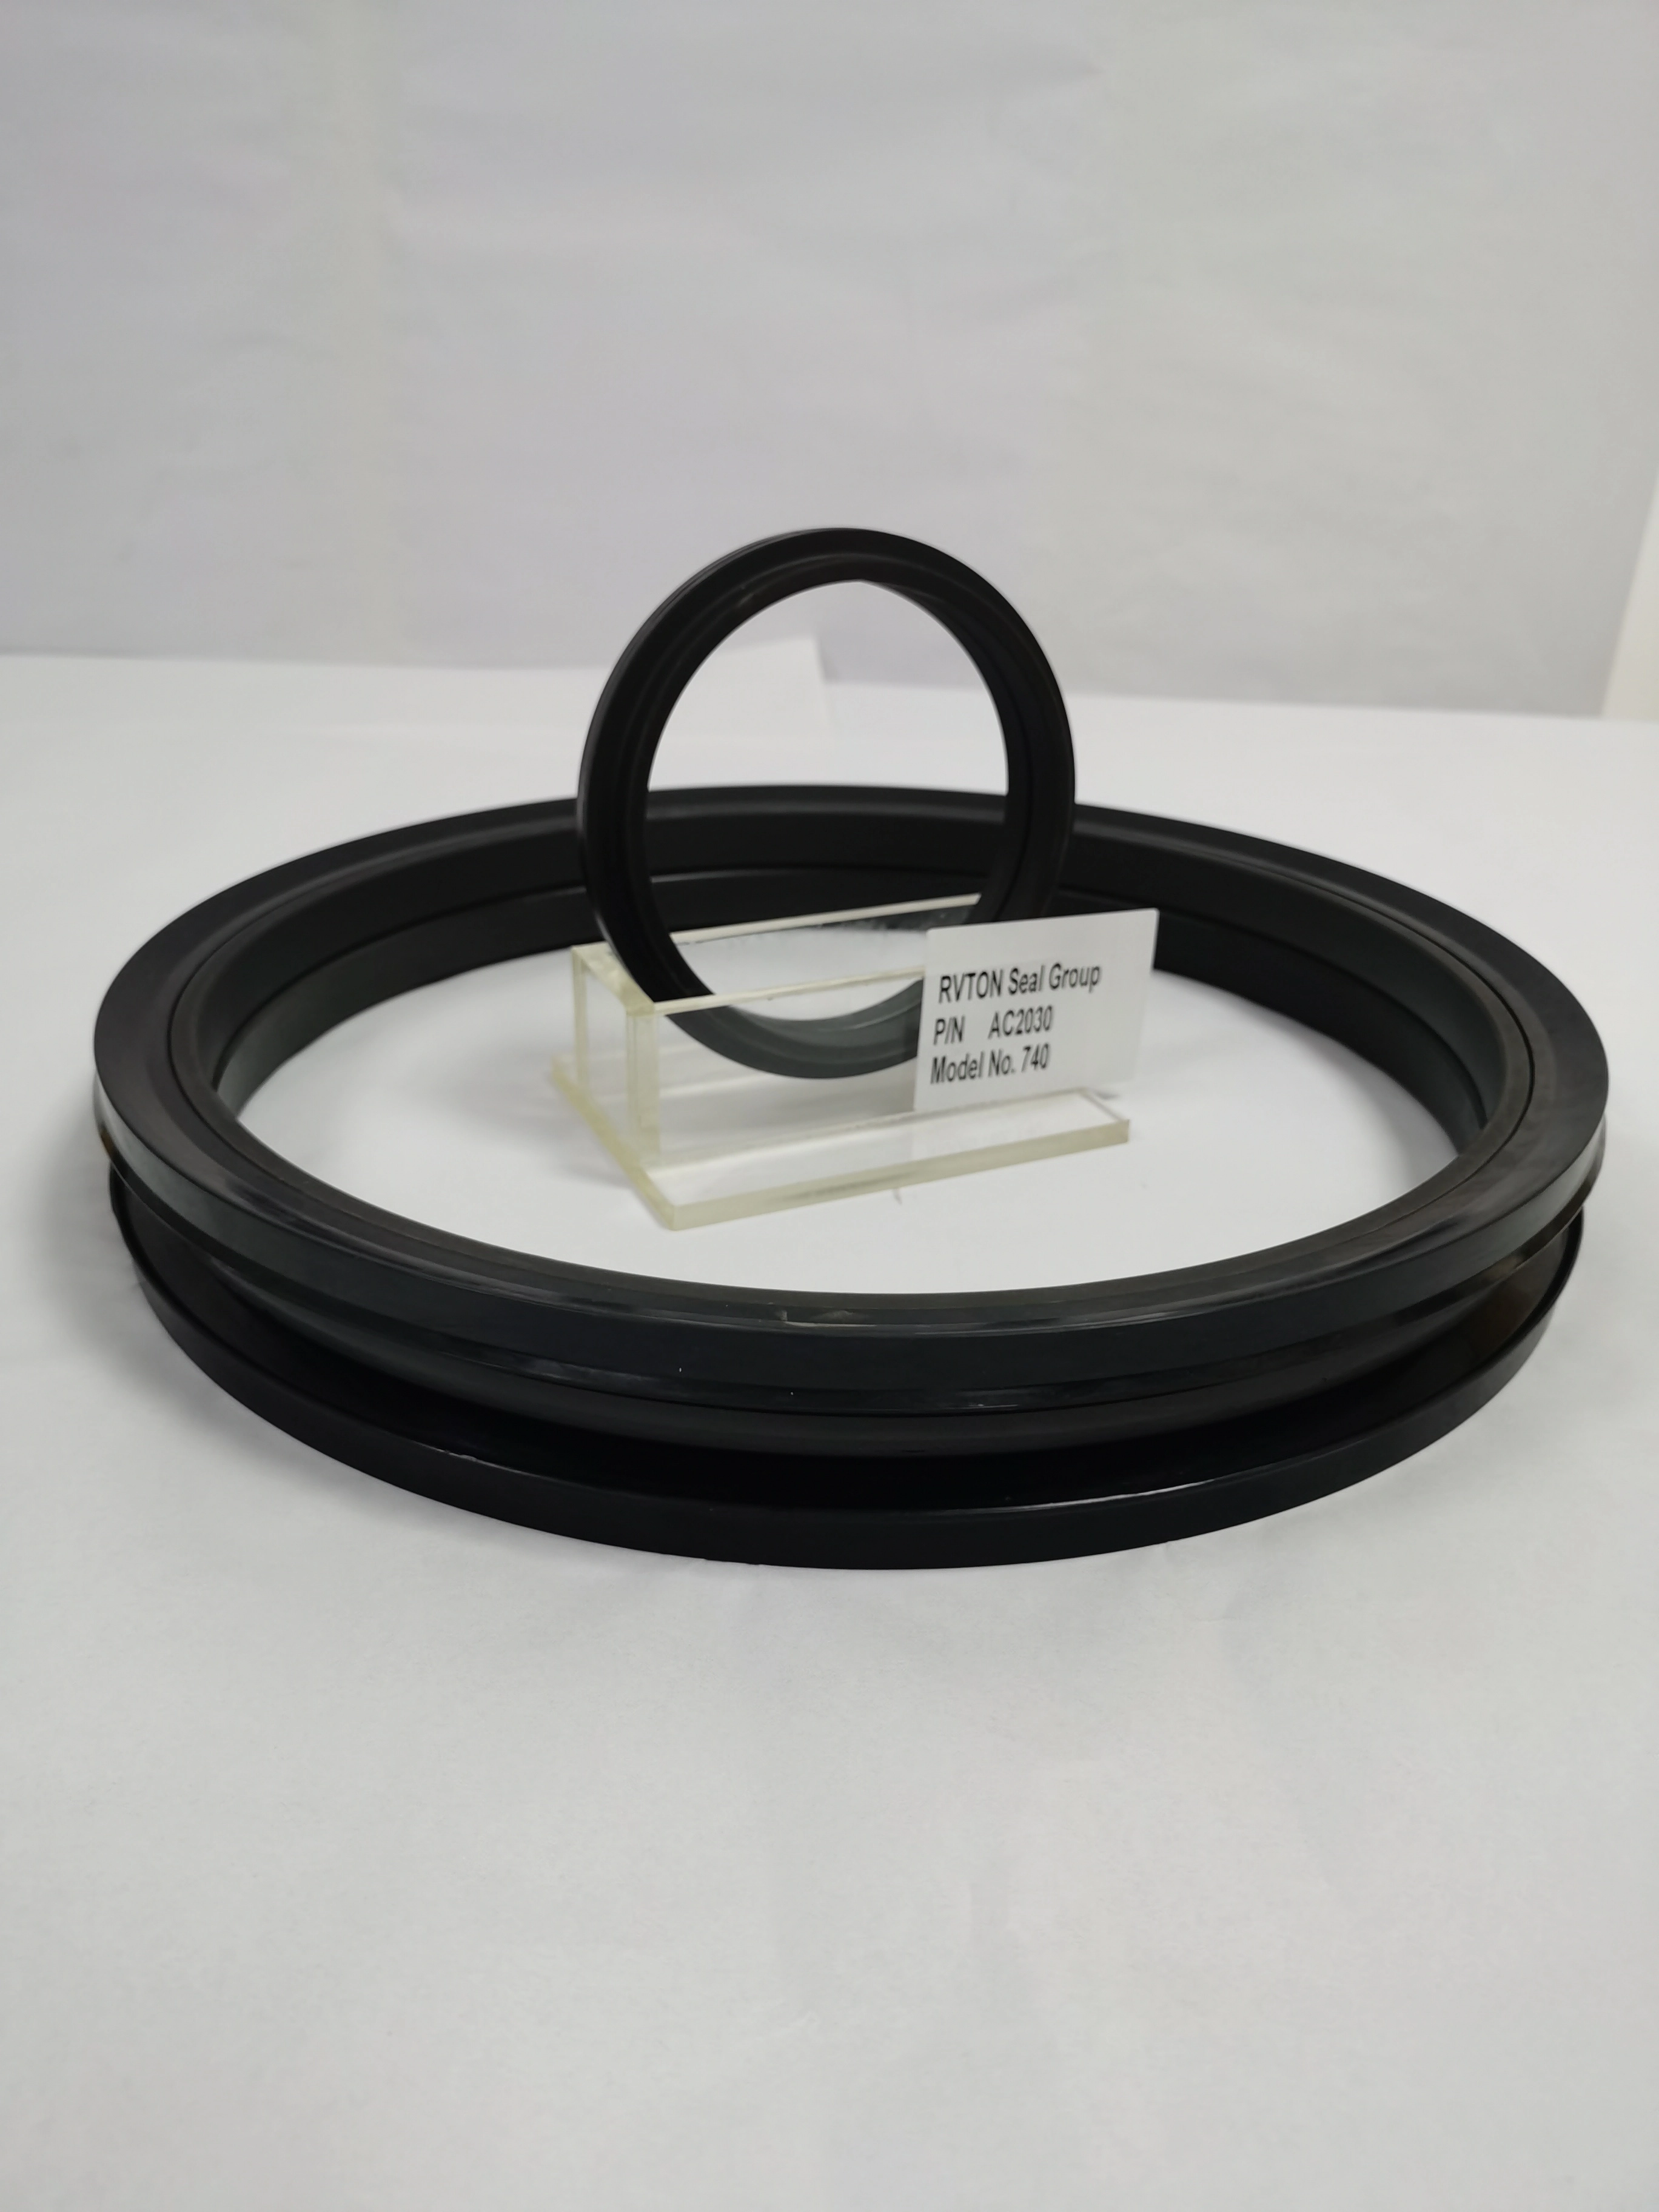 7610243 7610245 New Aftermarket Floating Seal Ring